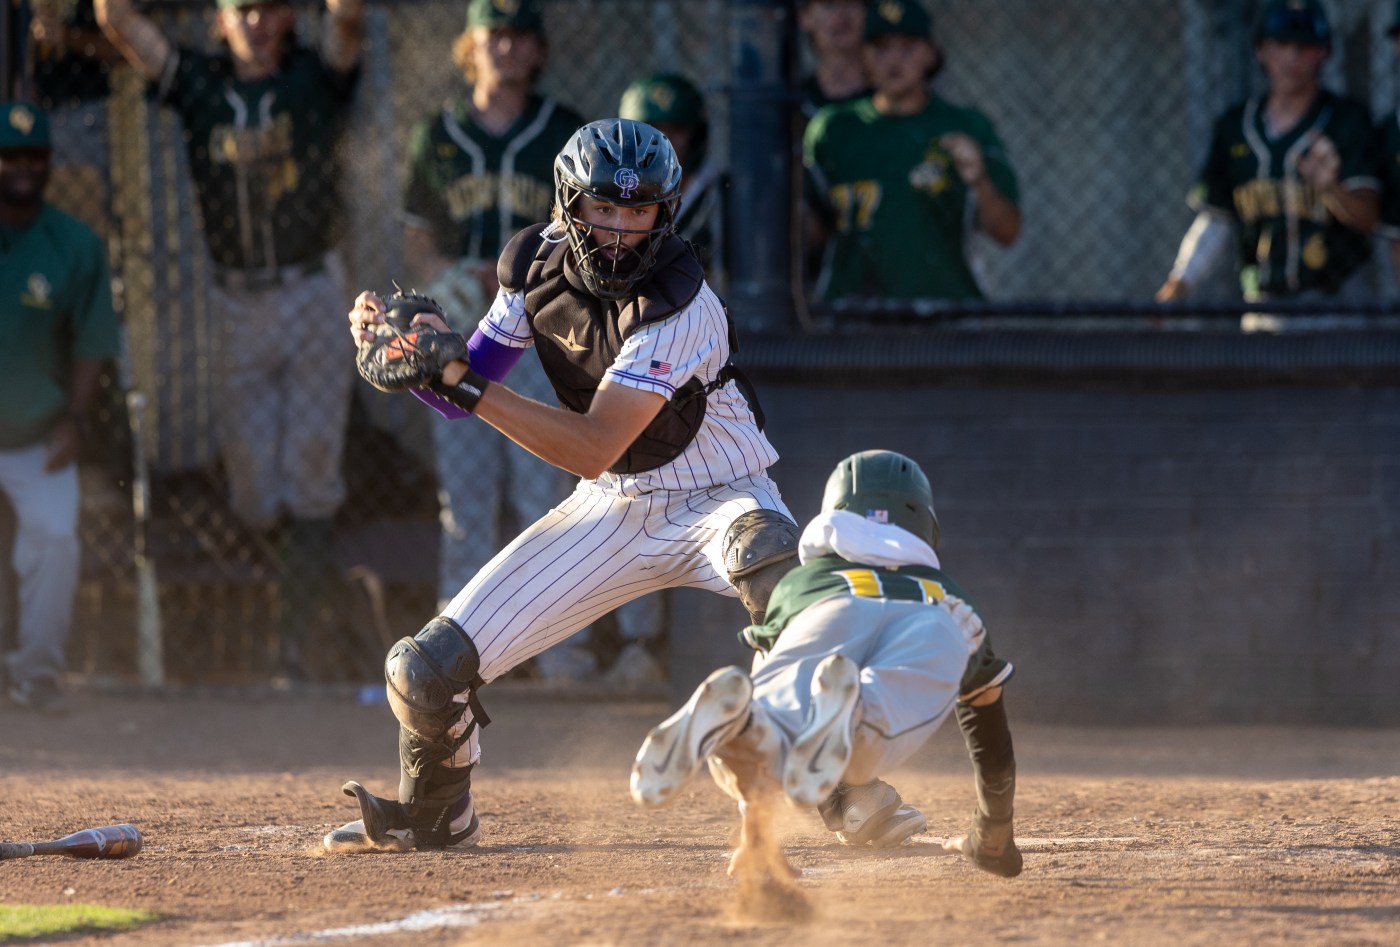 ncs-playoffs:-college-park-holds-off-castro-valley’s-comeback-bid,-liberty-softball-upsets-vintage